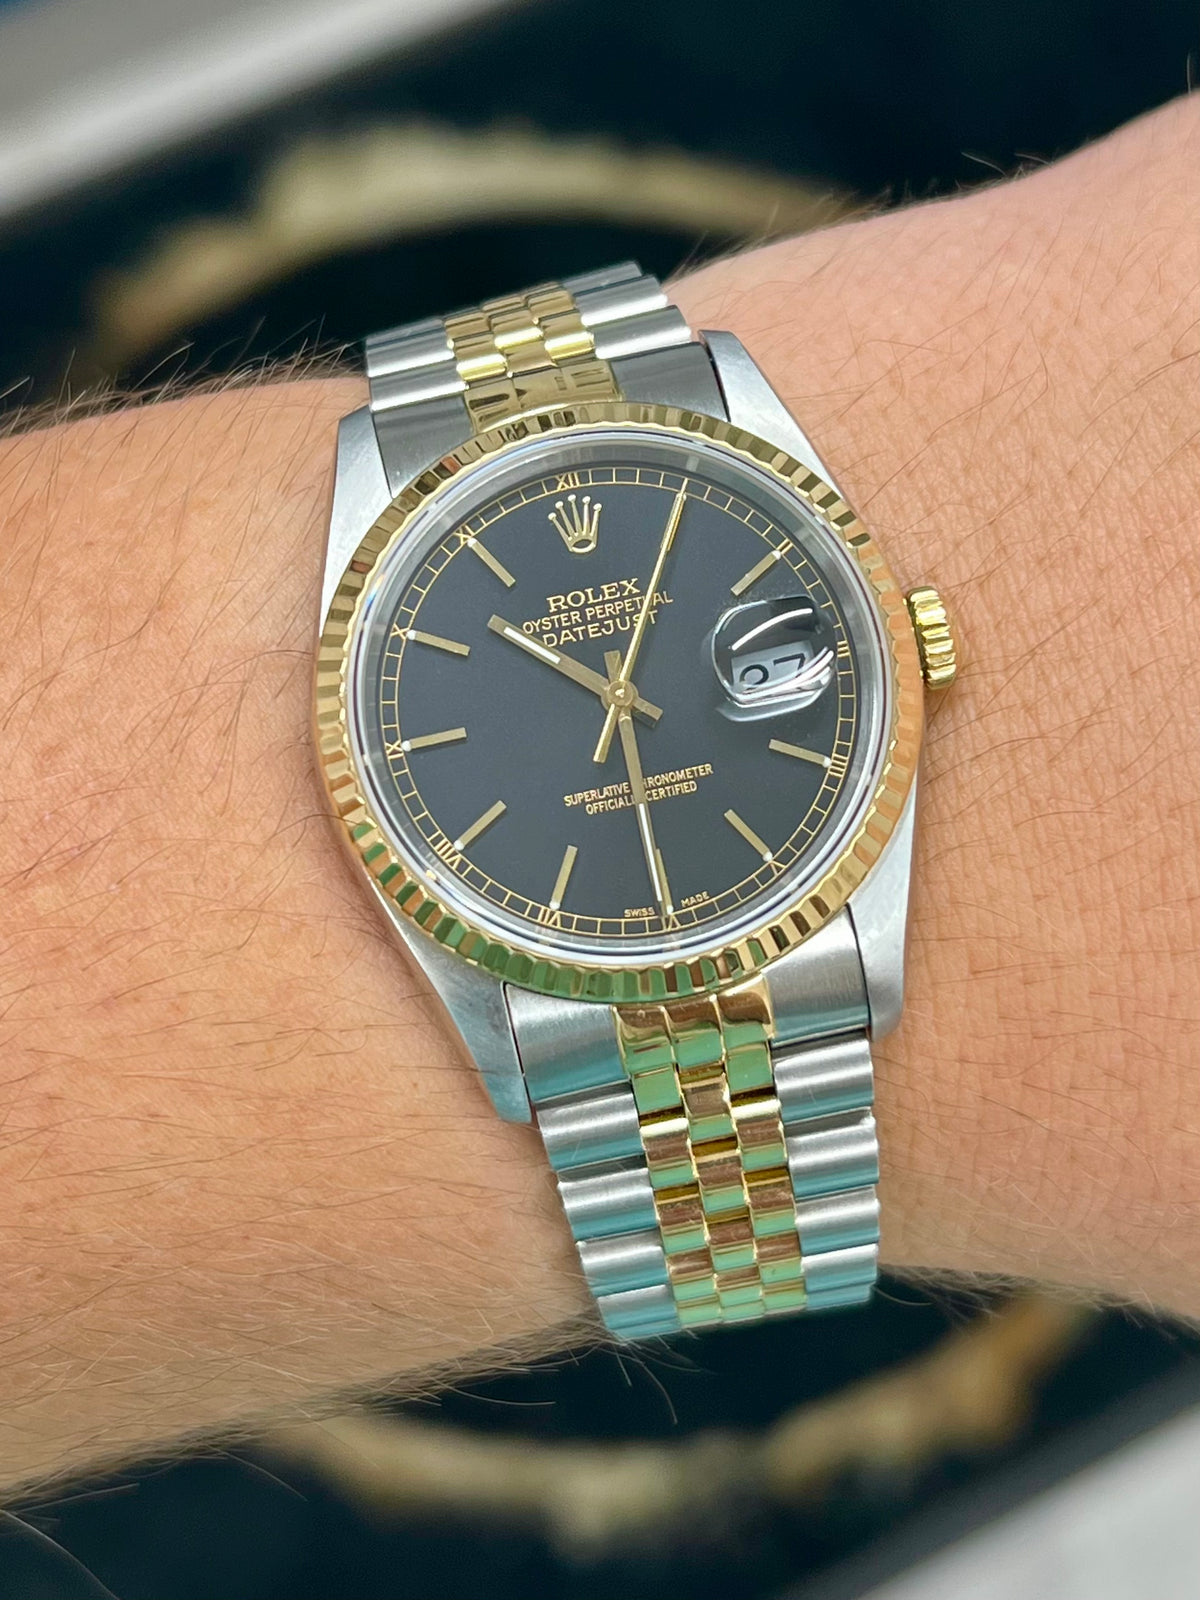 Rolex Datejust 36 Factory Black Baton Dial ‘16233’ - Ride On Timee